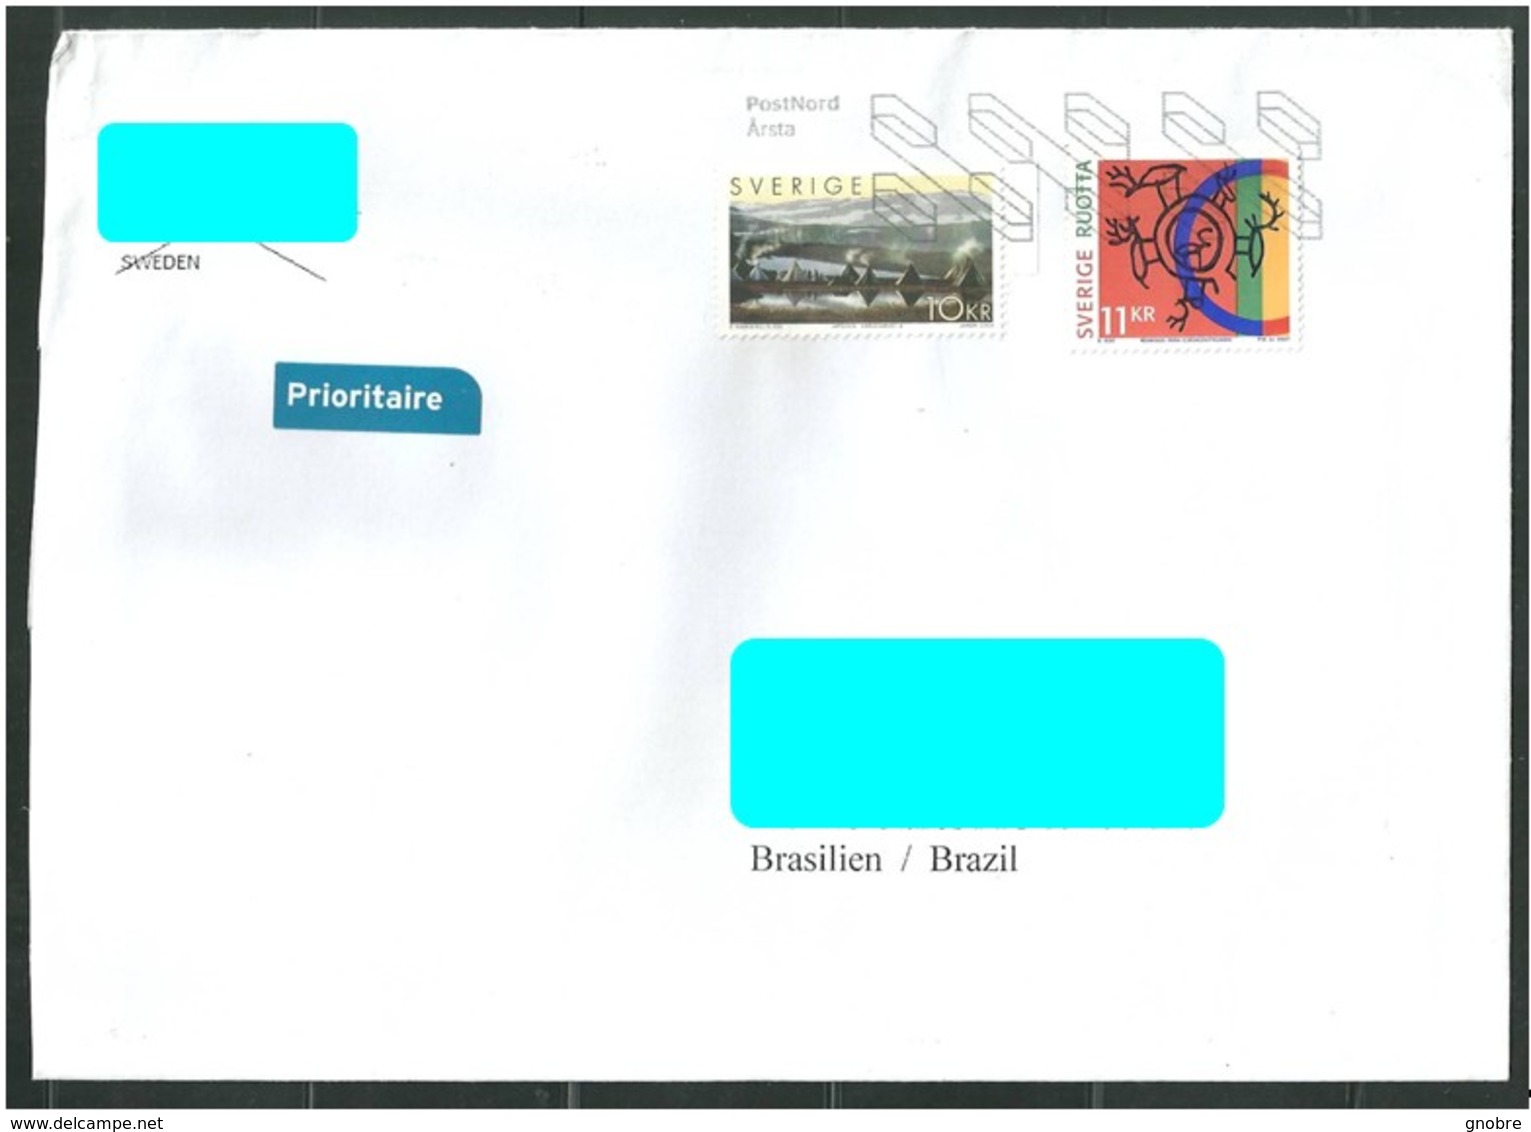 SWEDEN To Brazil Cover Sent In 2018? With 2 Topical Stamps And Beautiful Cancel Mark (GN 0117). - Storia Postale